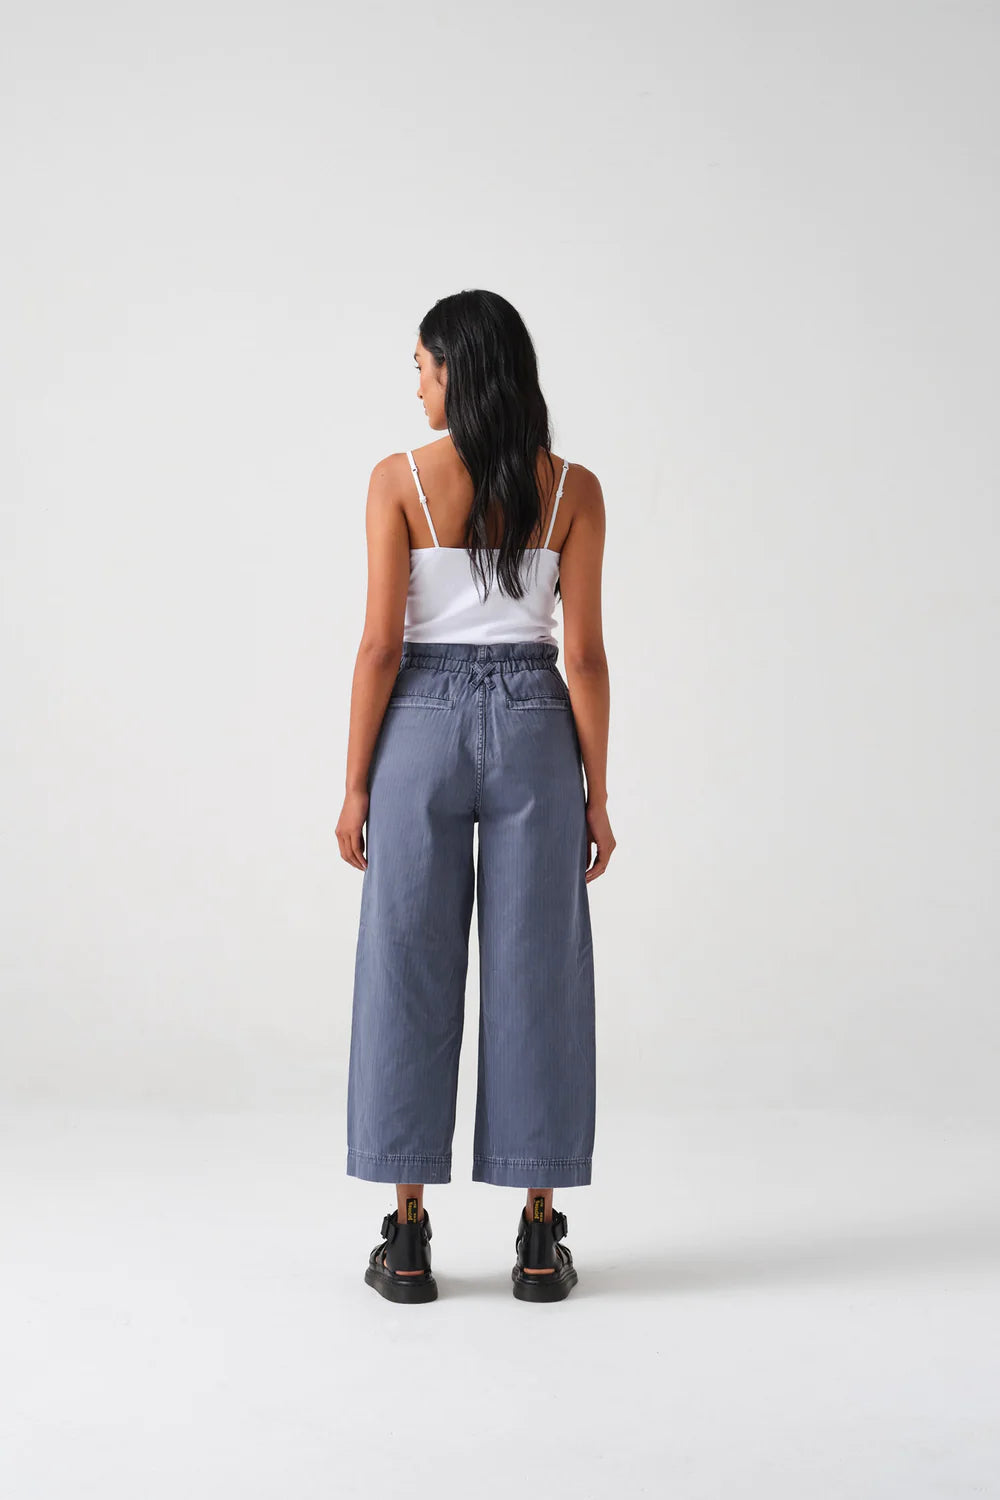 S&M Louis Pant in Washed Denim